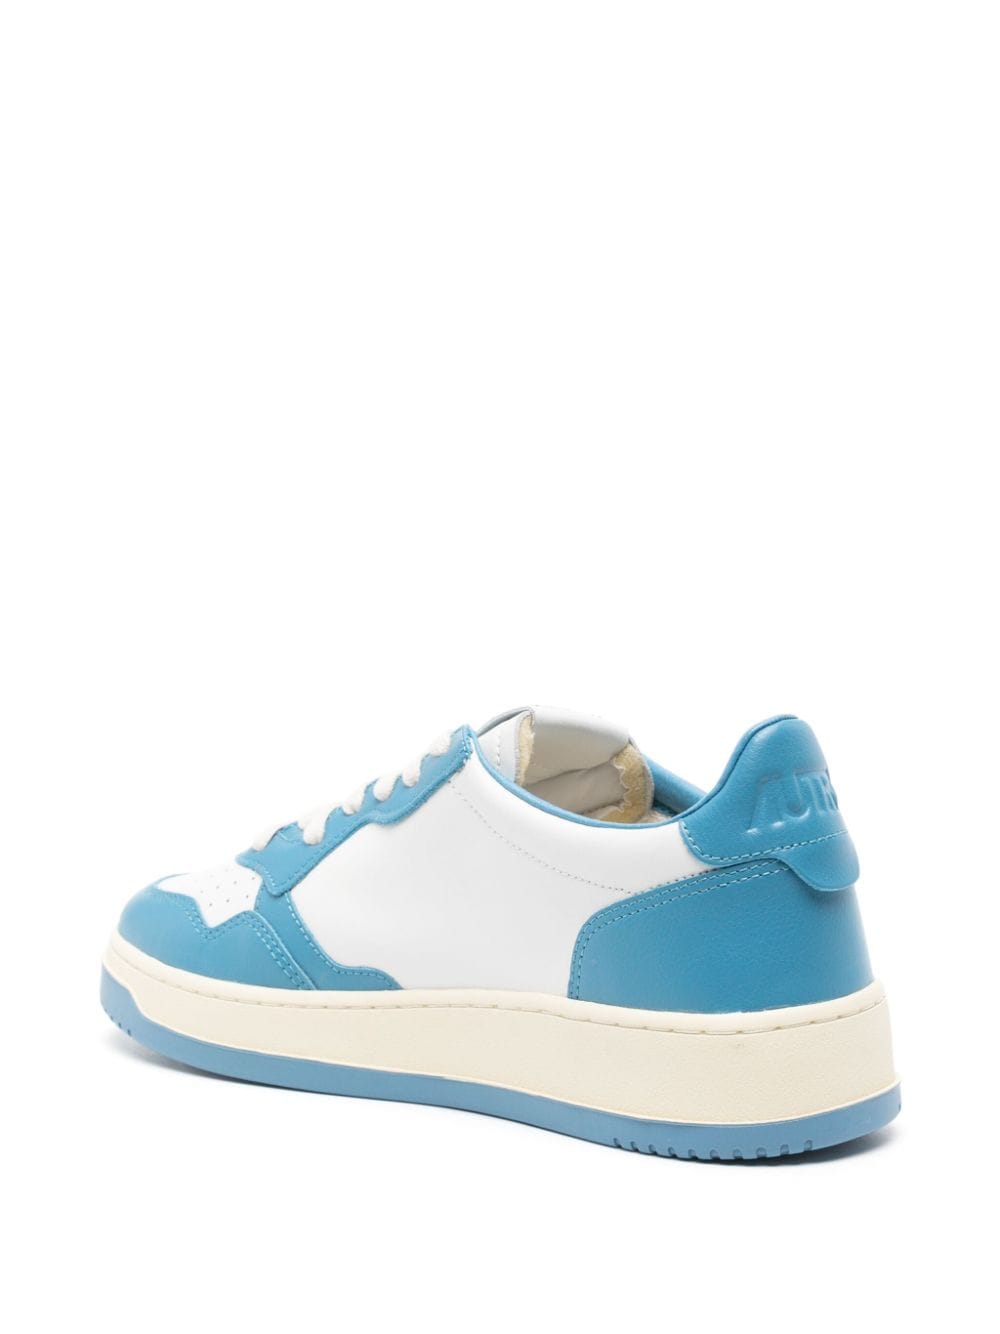 White and light blue leather sneakers